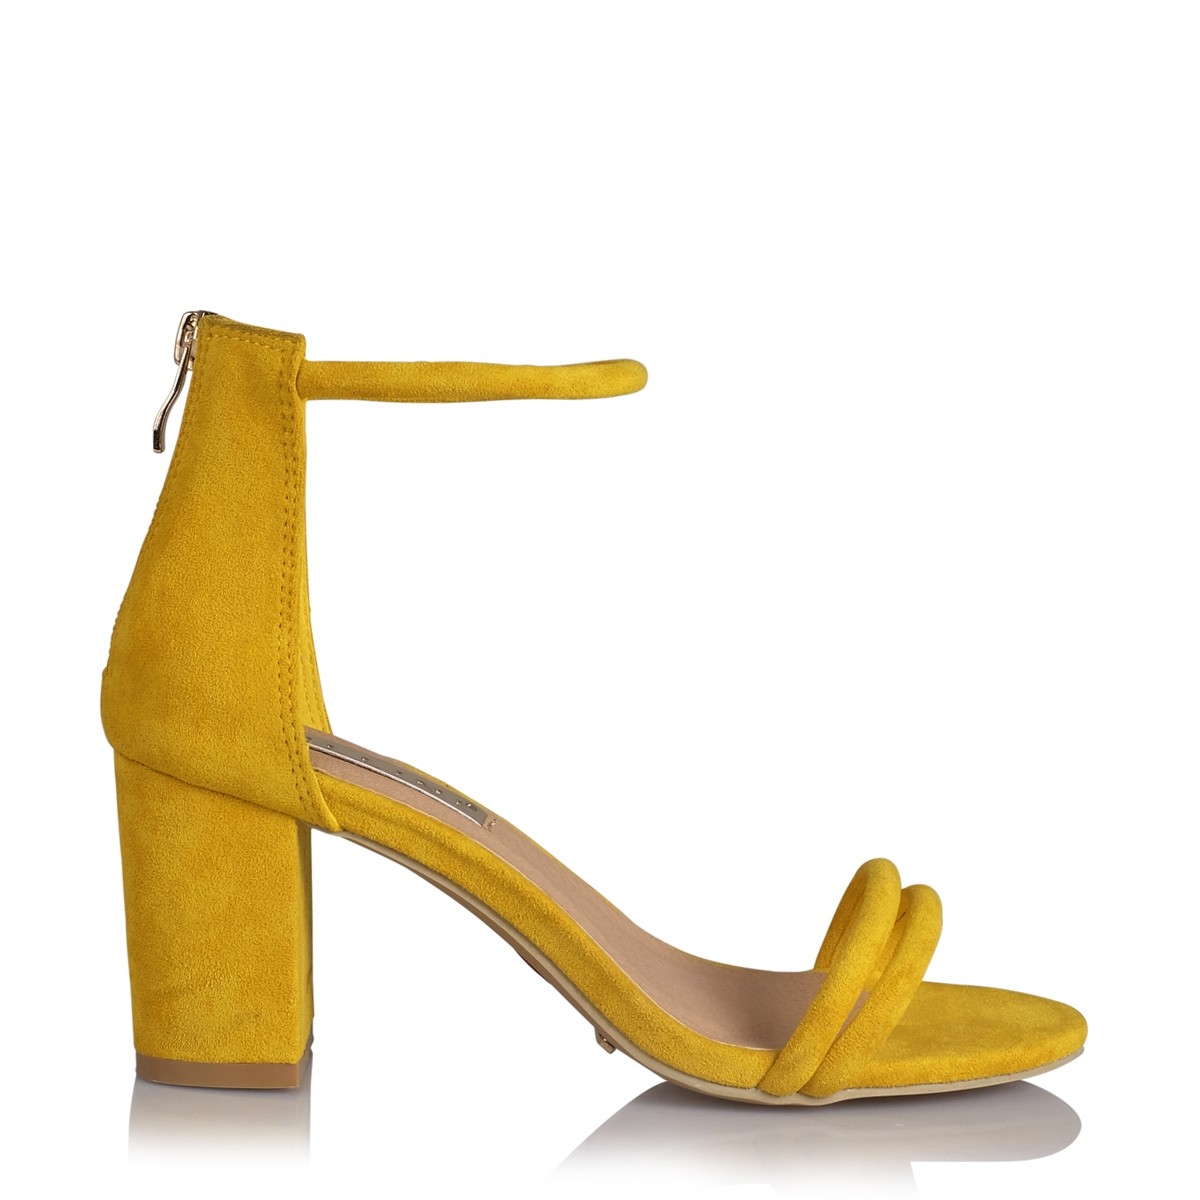 Fiji Yellow Suede by Billini Shoes on Sale | ShoeSales